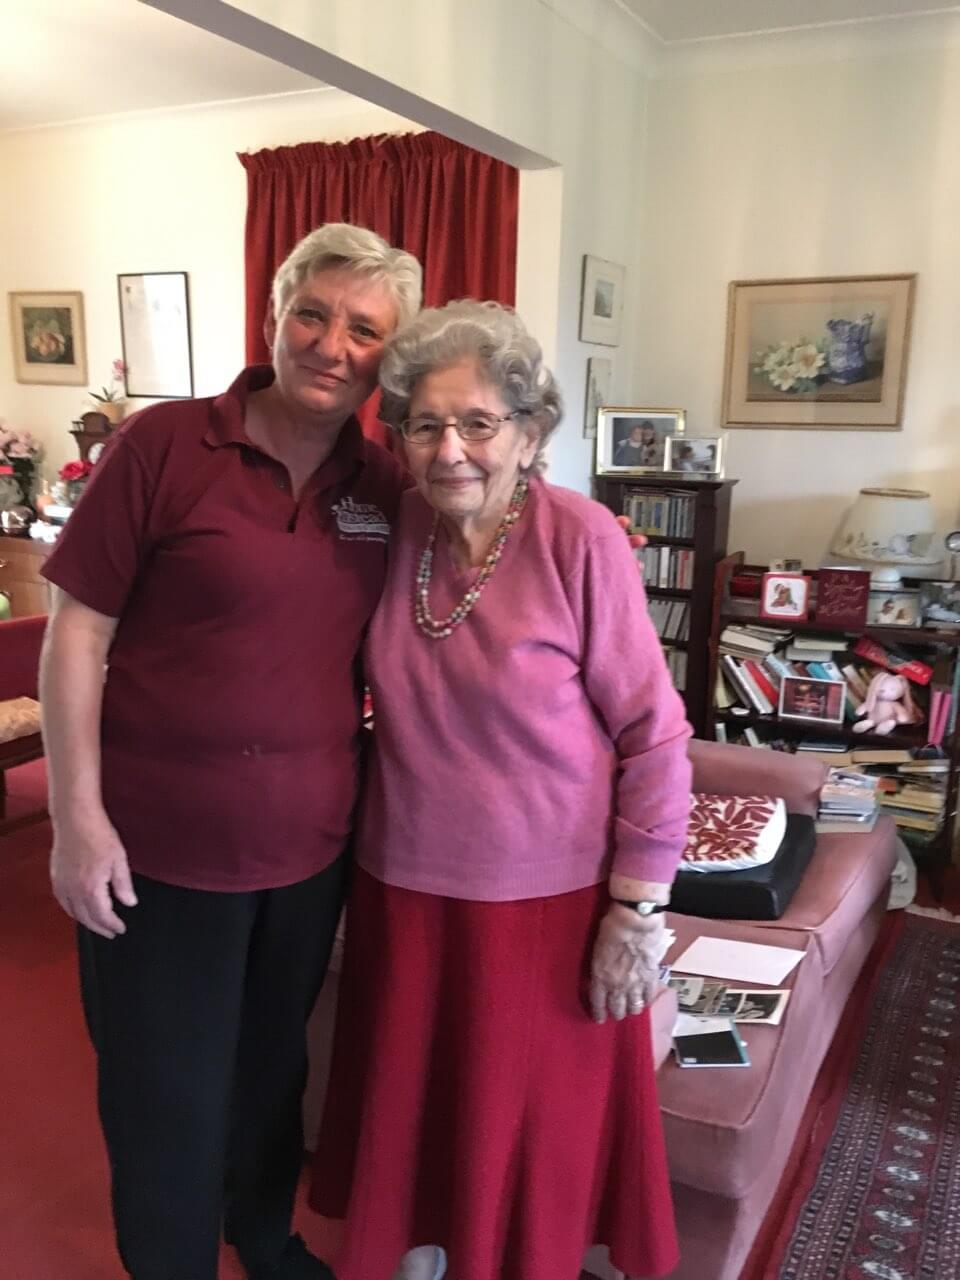 Home Instead care assistant Nicky hugging older person in her own home